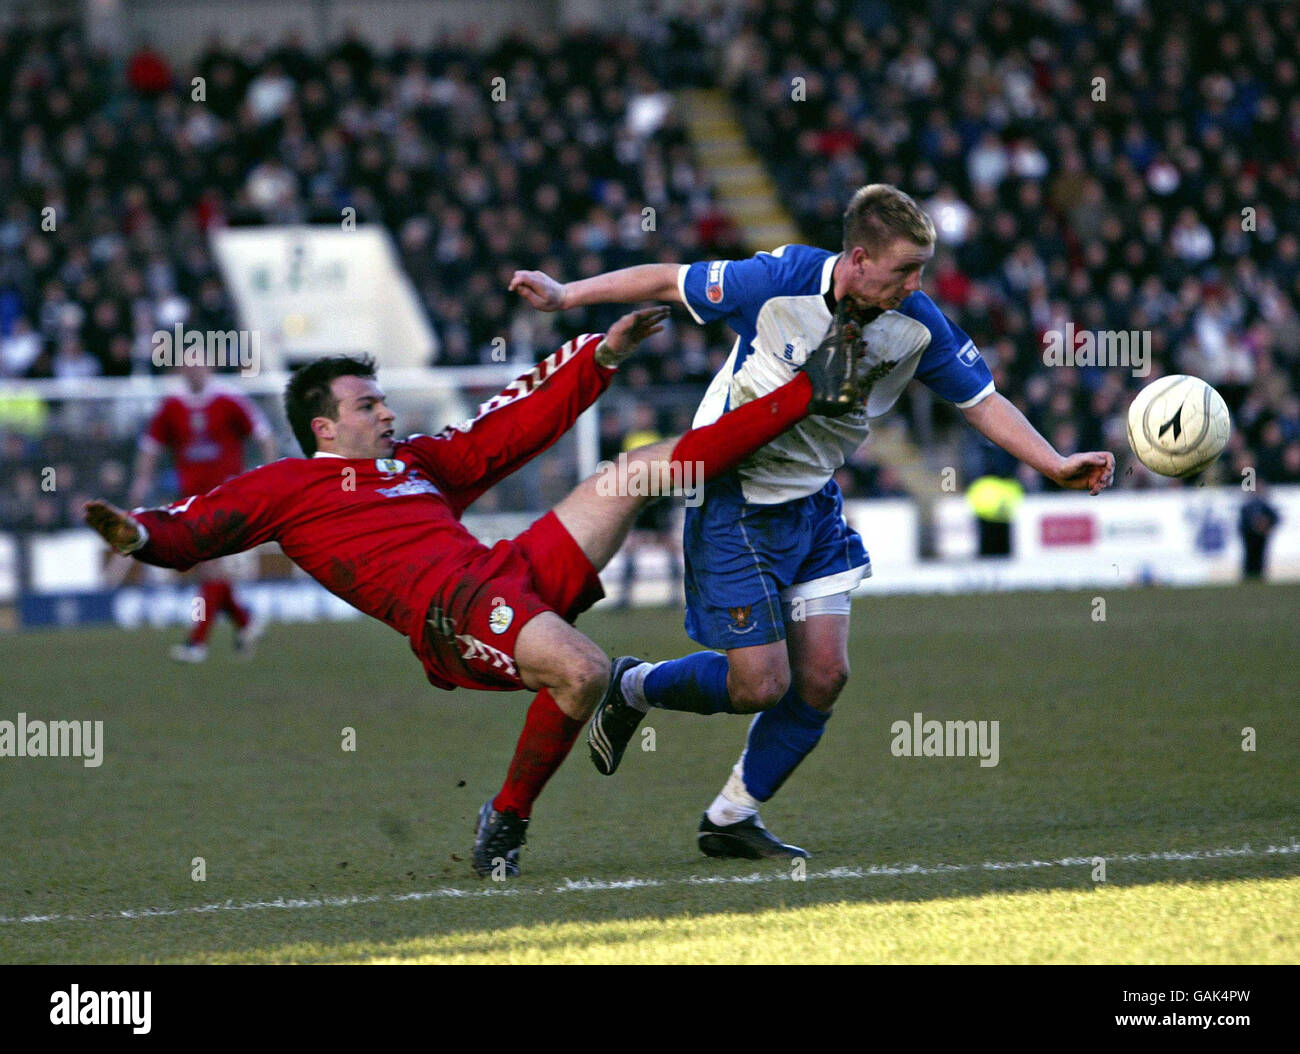 Soccer - Scottish Cup - Quarter Final - St Johnstone v St Mirren - McDiarmid Park. St Johnstone's Andy Jackson is hit by St Mirren's Ian Maxwell during the Scottish Cup Quarter Final match at McDiarmid Park, Perth. Stock Photo